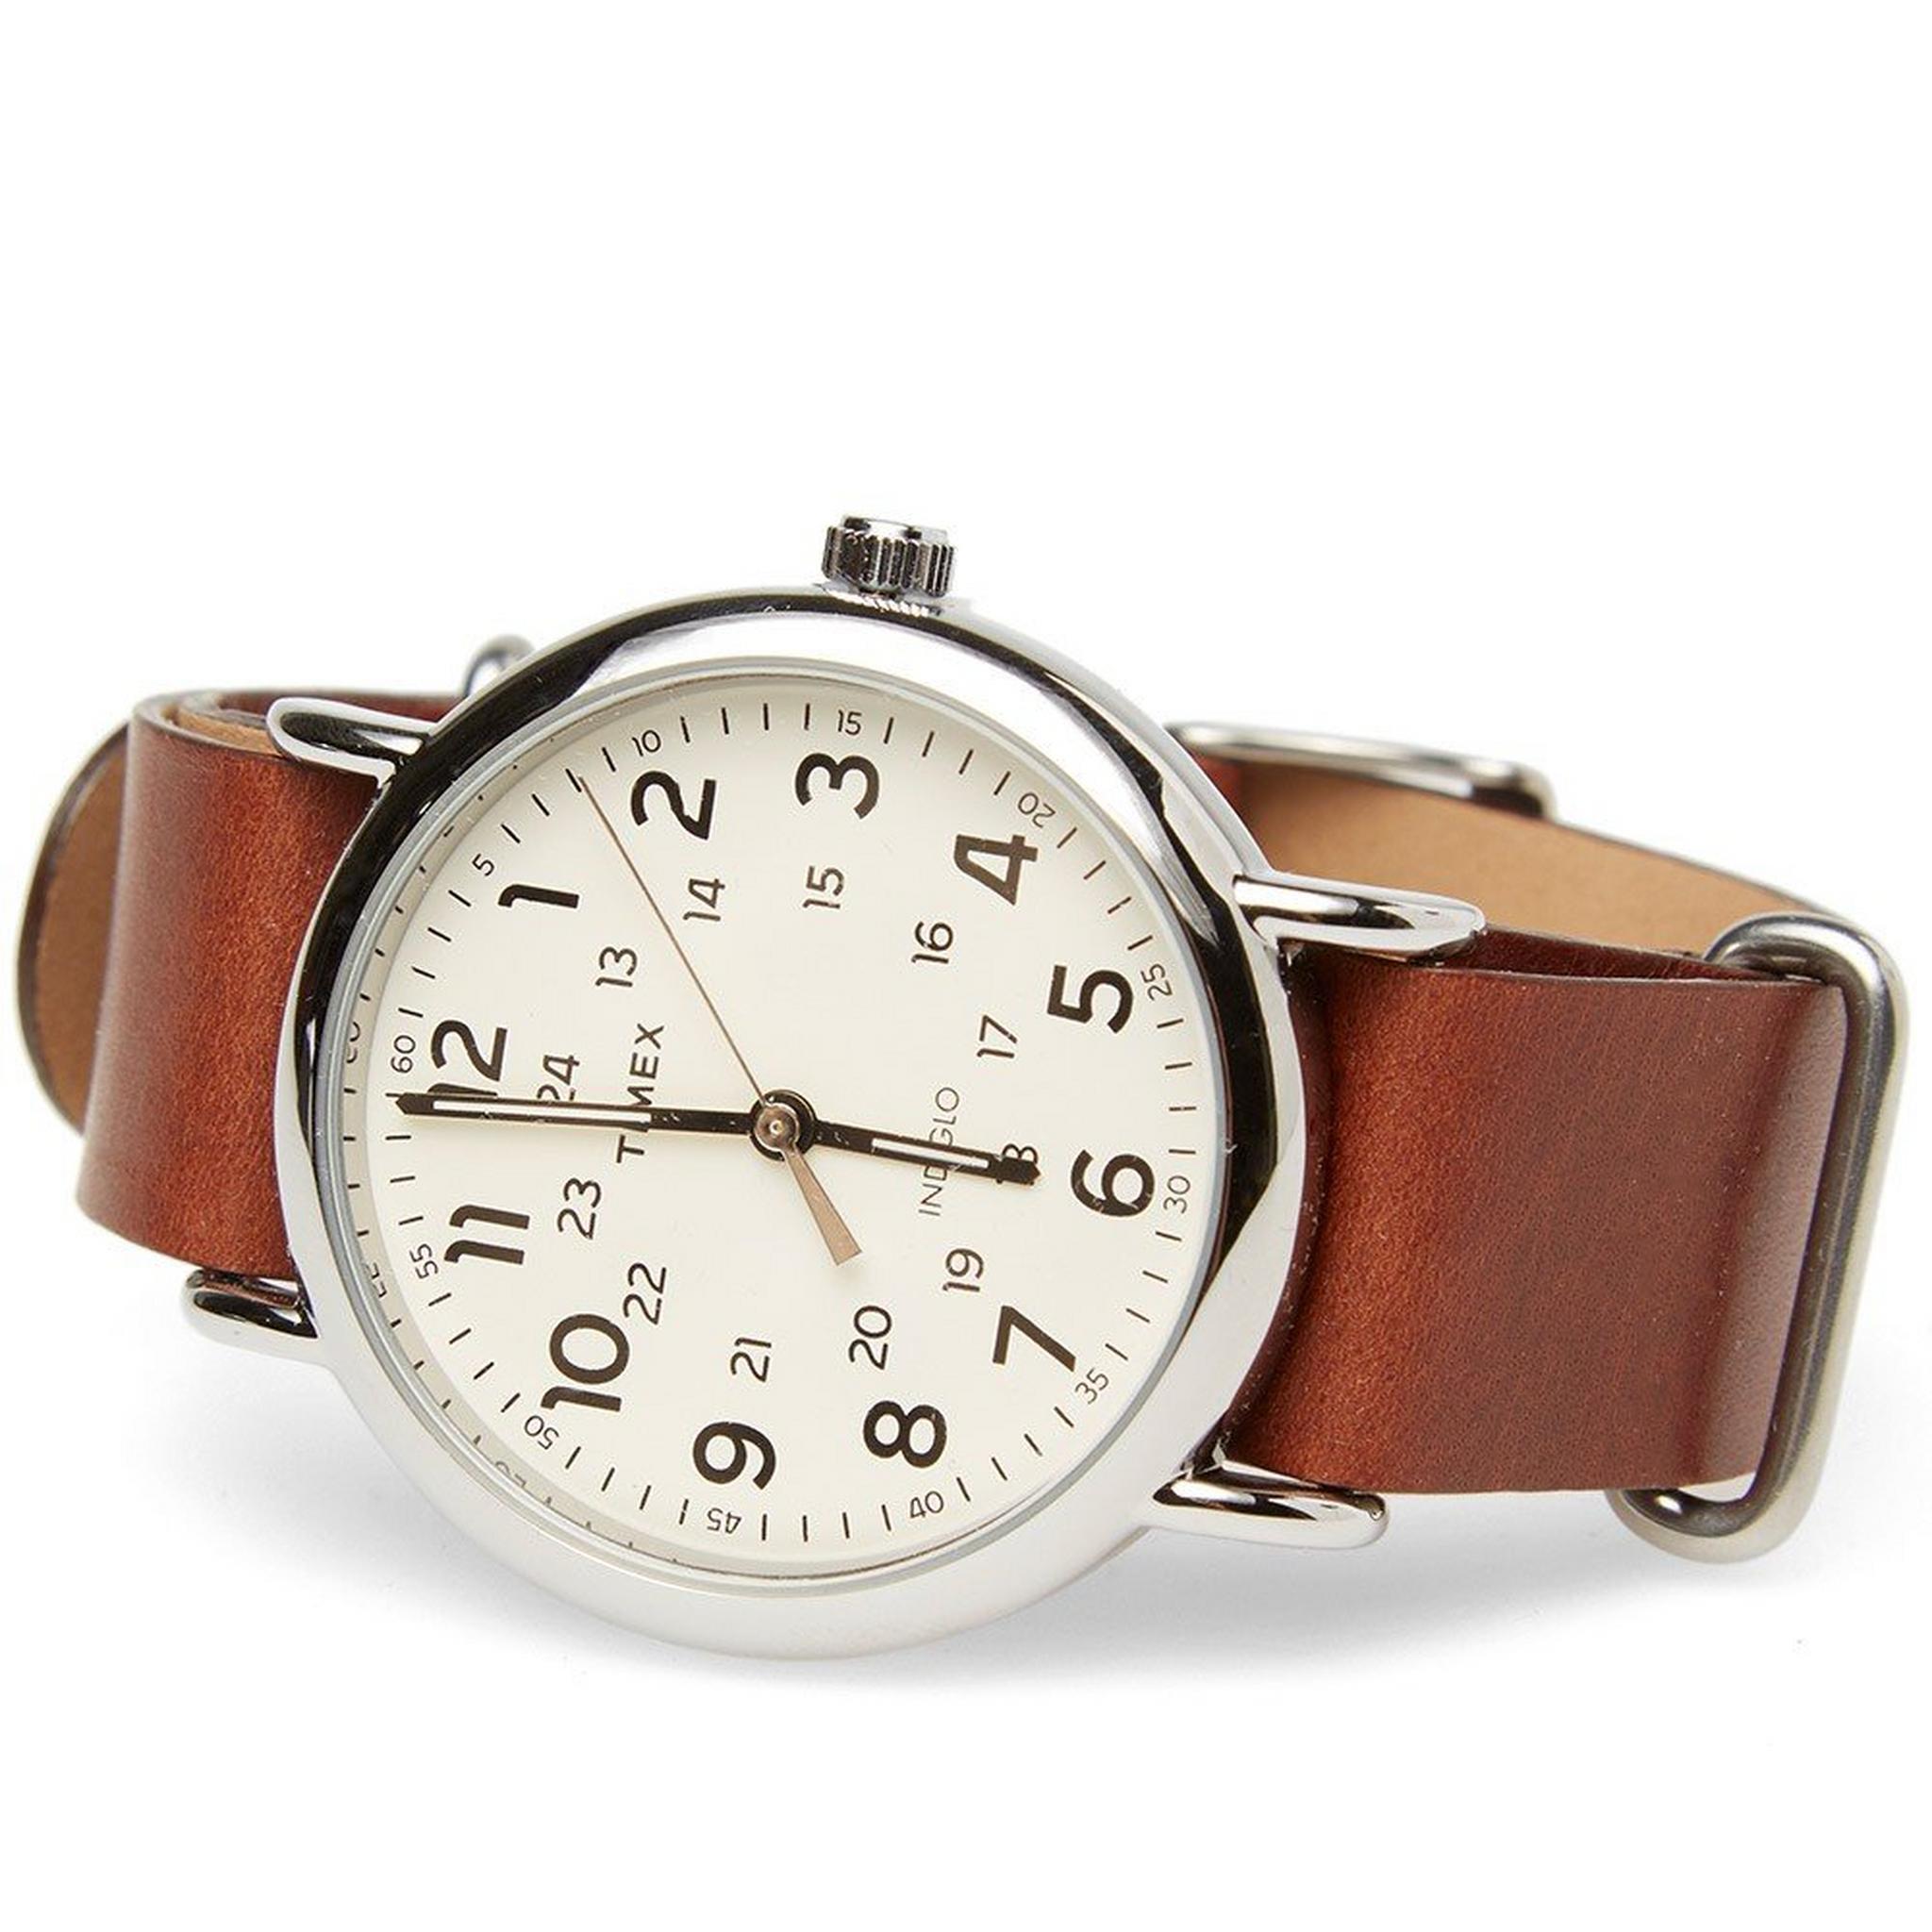 Timex T2P495 Unisex Watch - Leather Strap